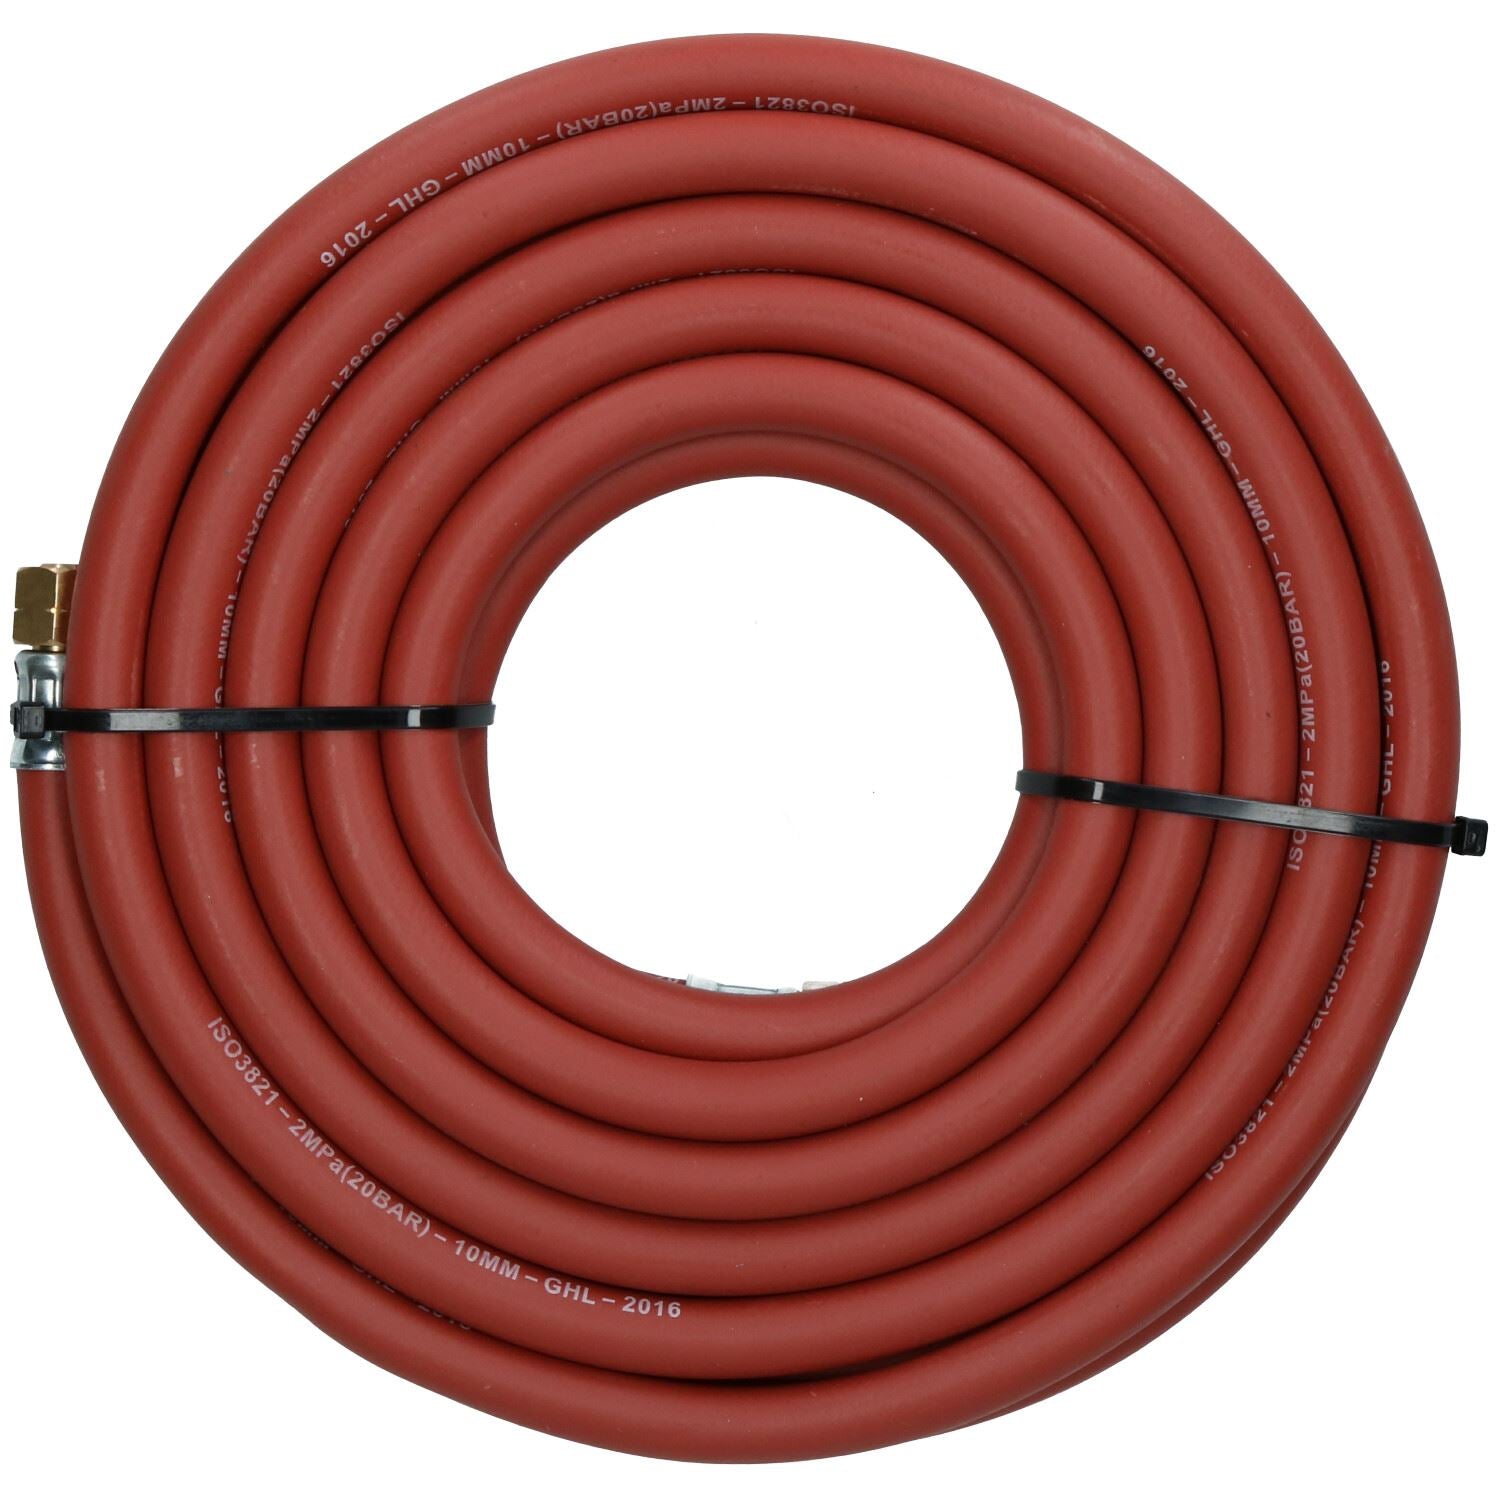 Single Acetylene Fitted Rubber Hose Pipe Cutting & Welding 5M 3/8" BSP Gas